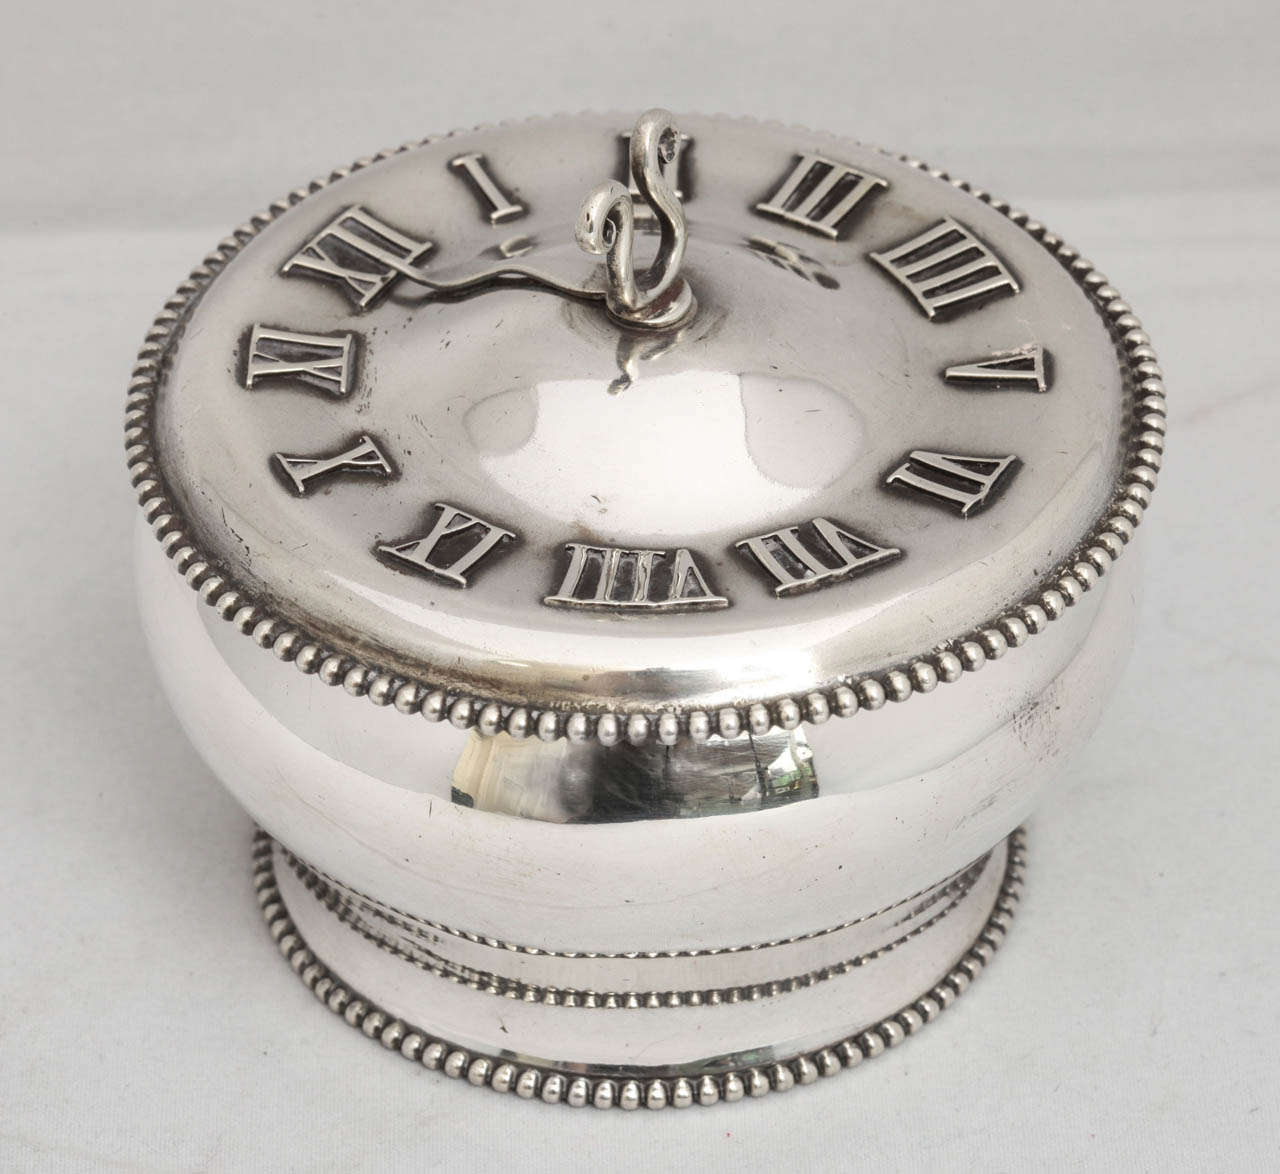 Victorian, very unusual, sterling silver round box with sundial on lid, The Gorham Manufacturing Co., Providence, Rhode Island, year marked for 1880. Sundial handle moves. Beaded borders; gilded interior. Measures: 3 3/4 inches; high (to top of lyre